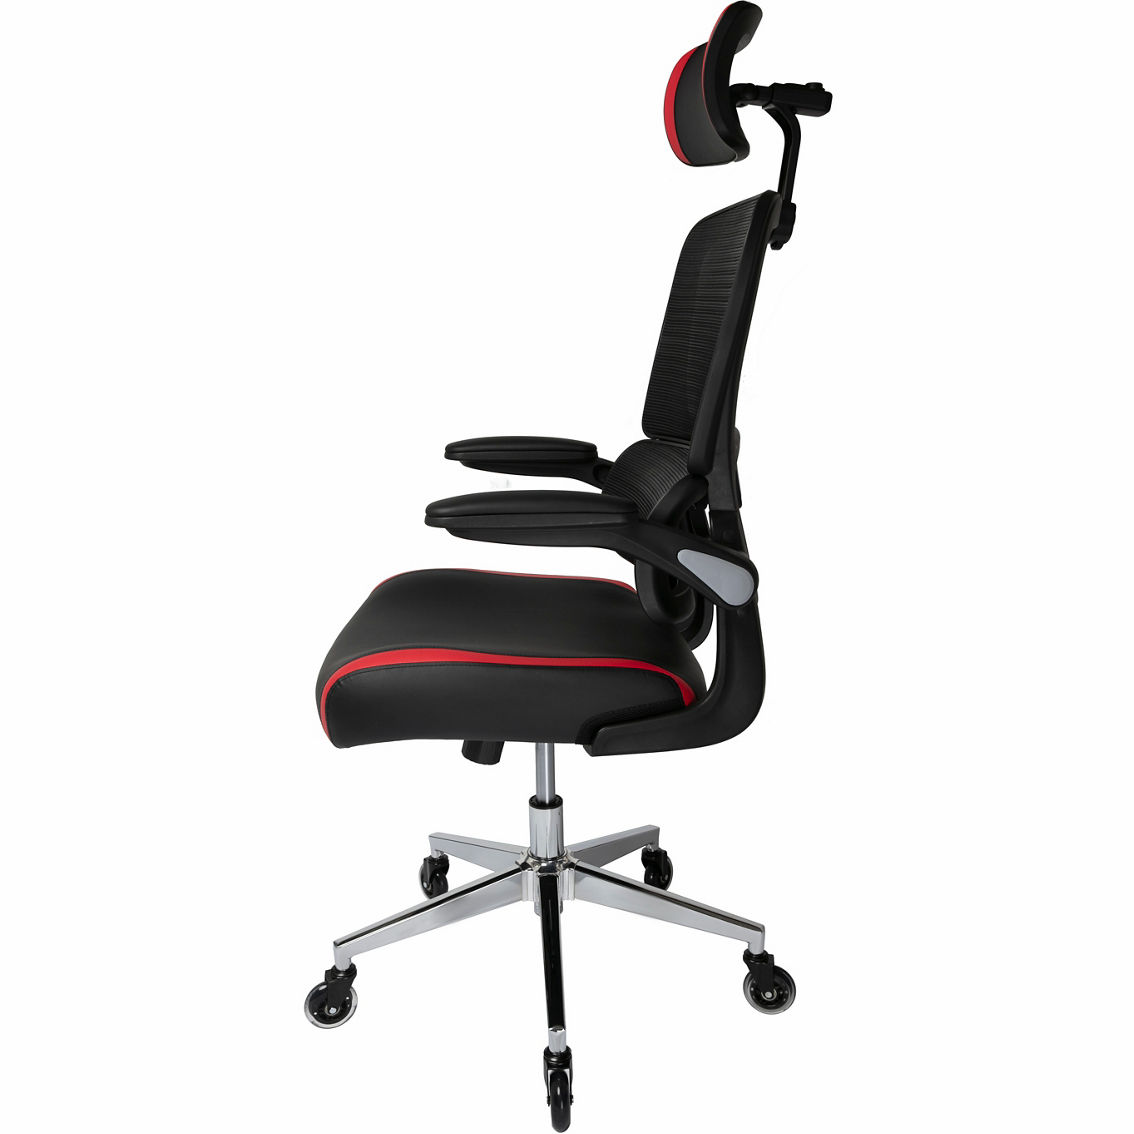 Simply Perfect Mesh Office Chair with Headrest - Image 9 of 10